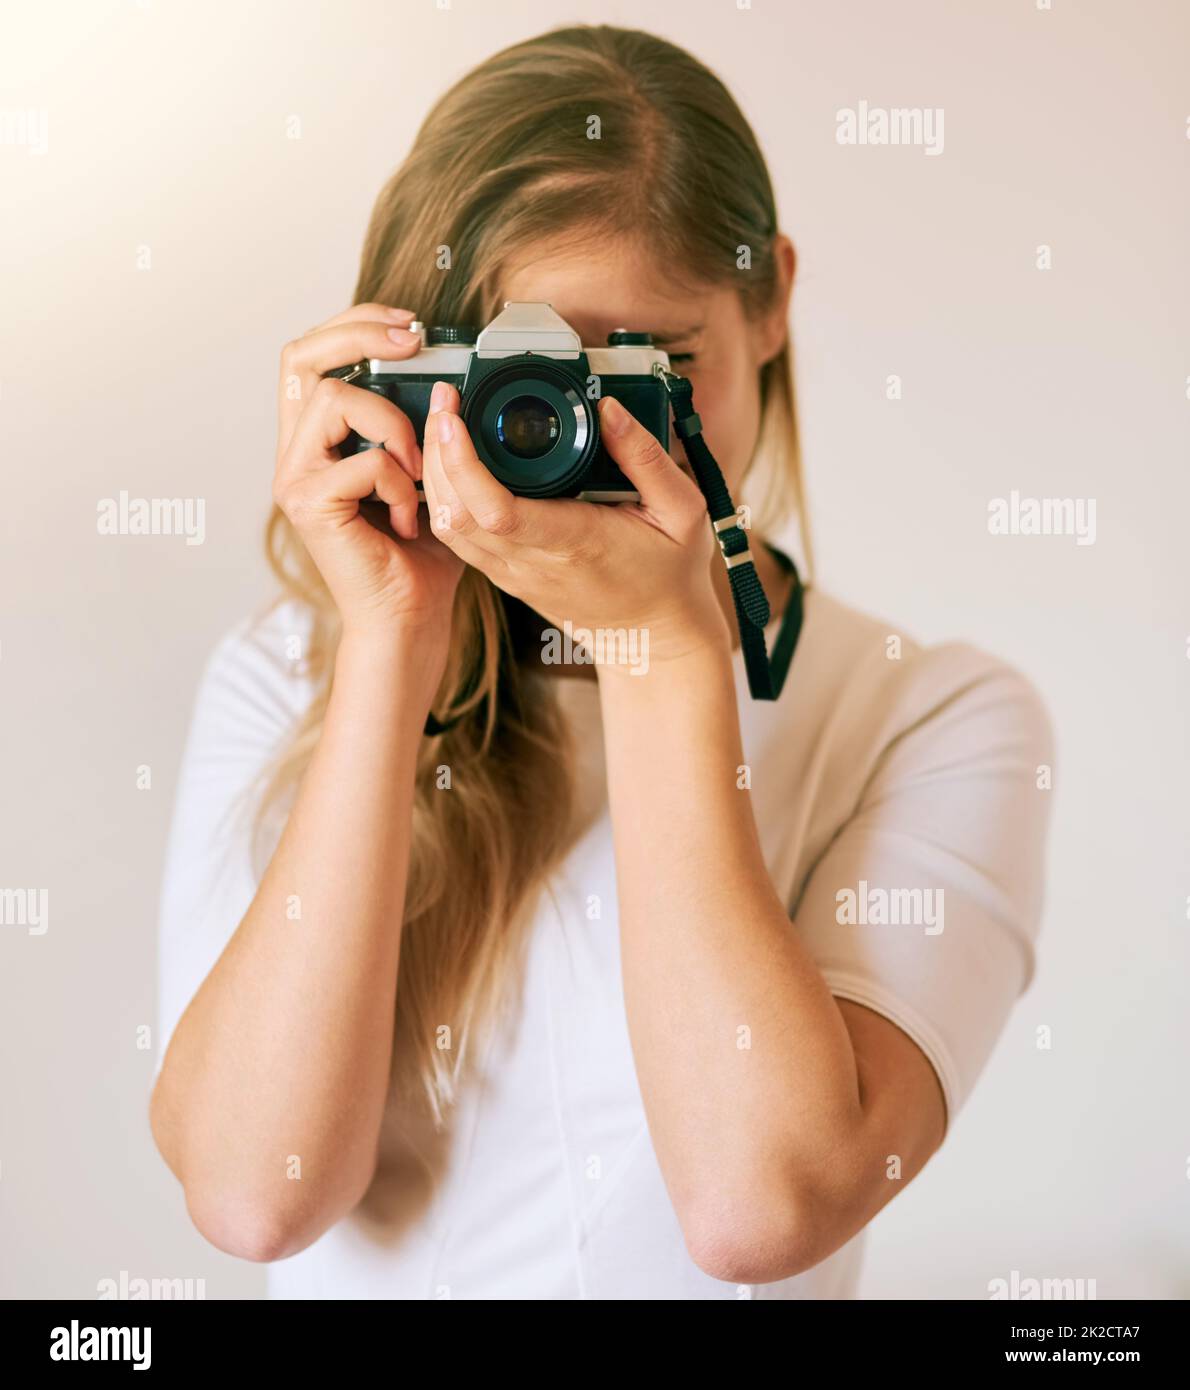 Freezing this moment in time. Shot of an unrecognizable young woman taking a photo with her camera at home. Stock Photo